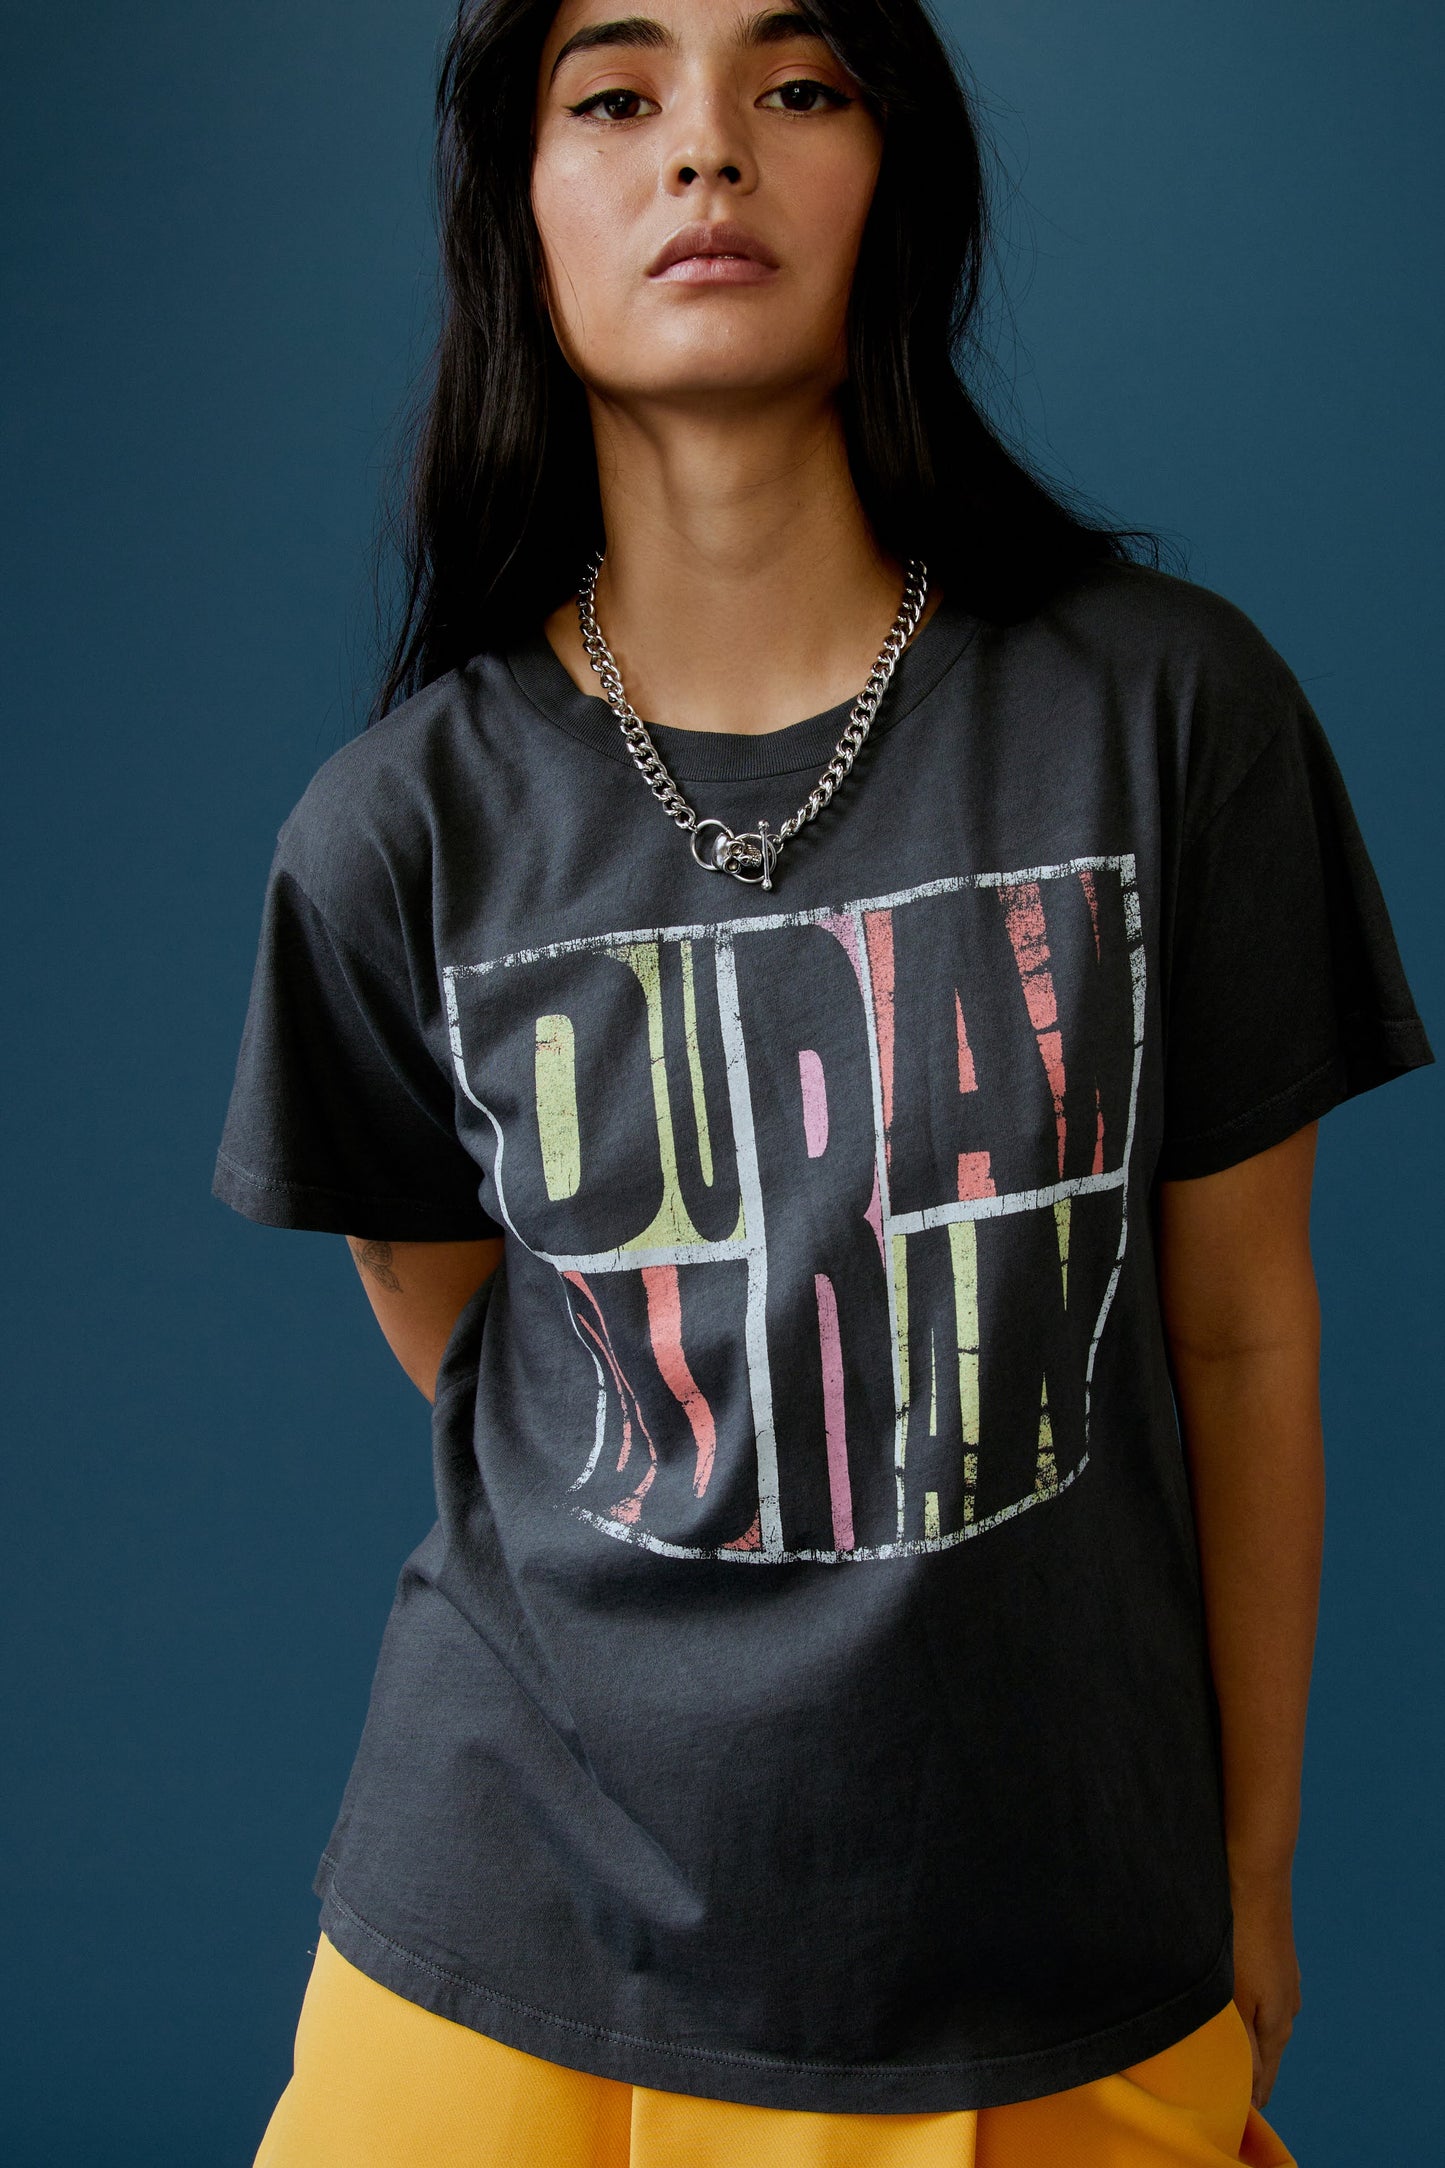 A dark-haired model featuring a black tee stamped with 'Duran Duran' in front and 'abstract', 'idealist', and 'romantic' at the back.